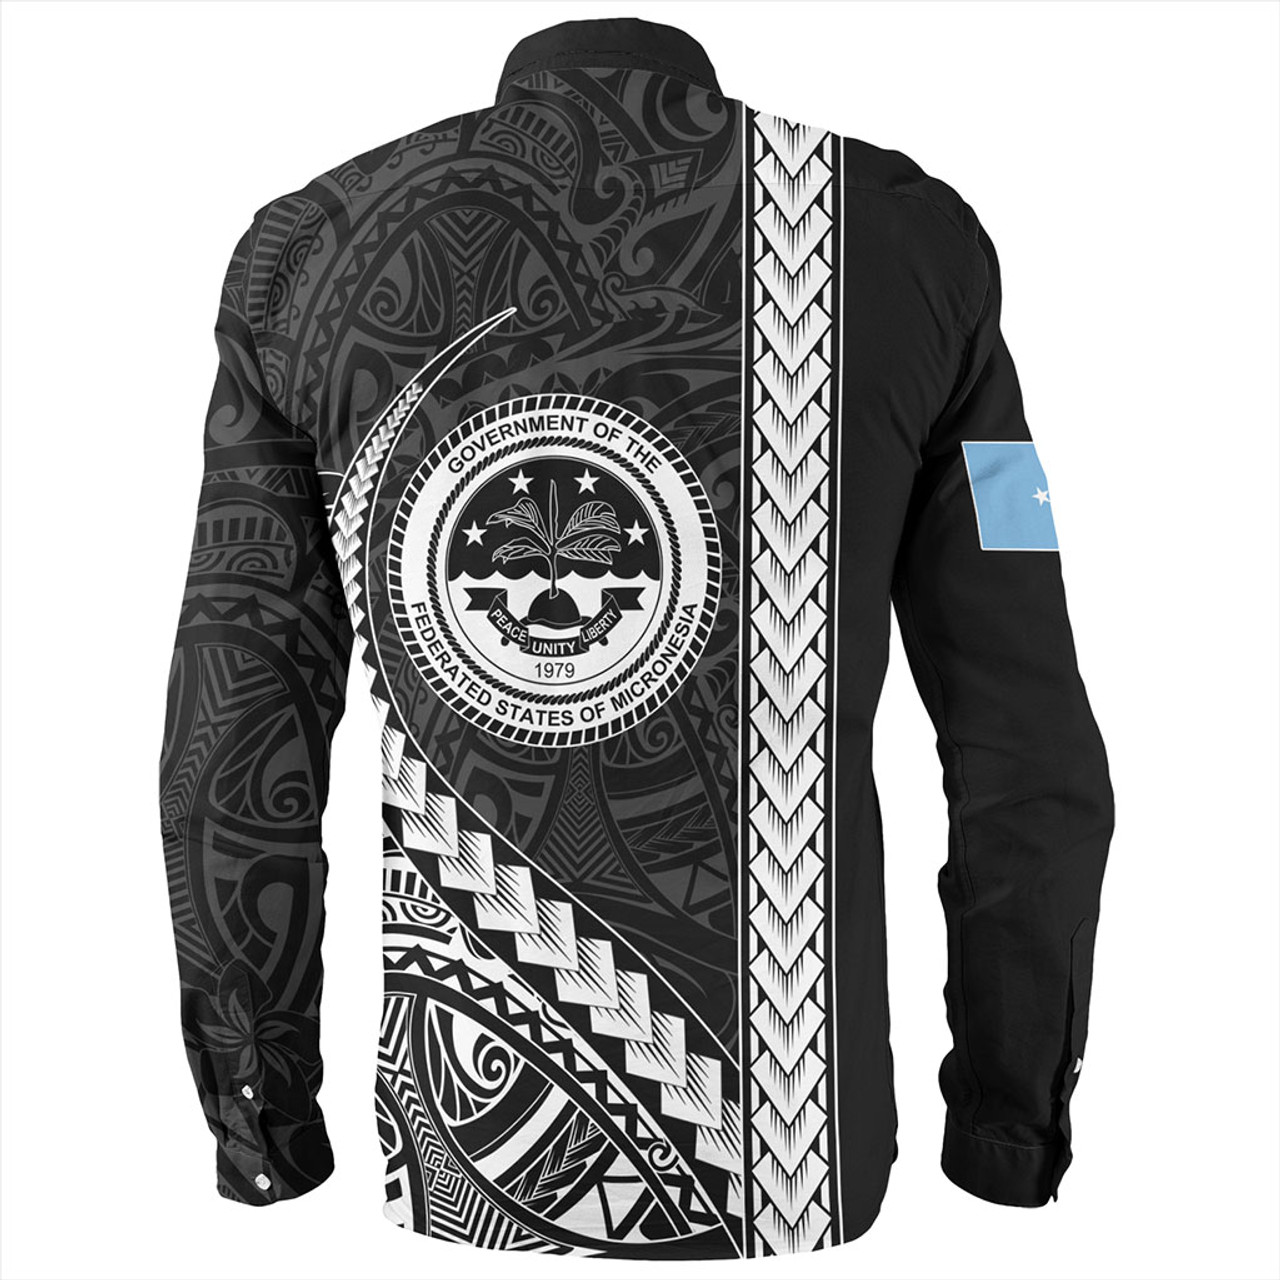 Federated States Of Micronesia Long Sleeve Shirt Tribal Micronesian Coat Of Arms